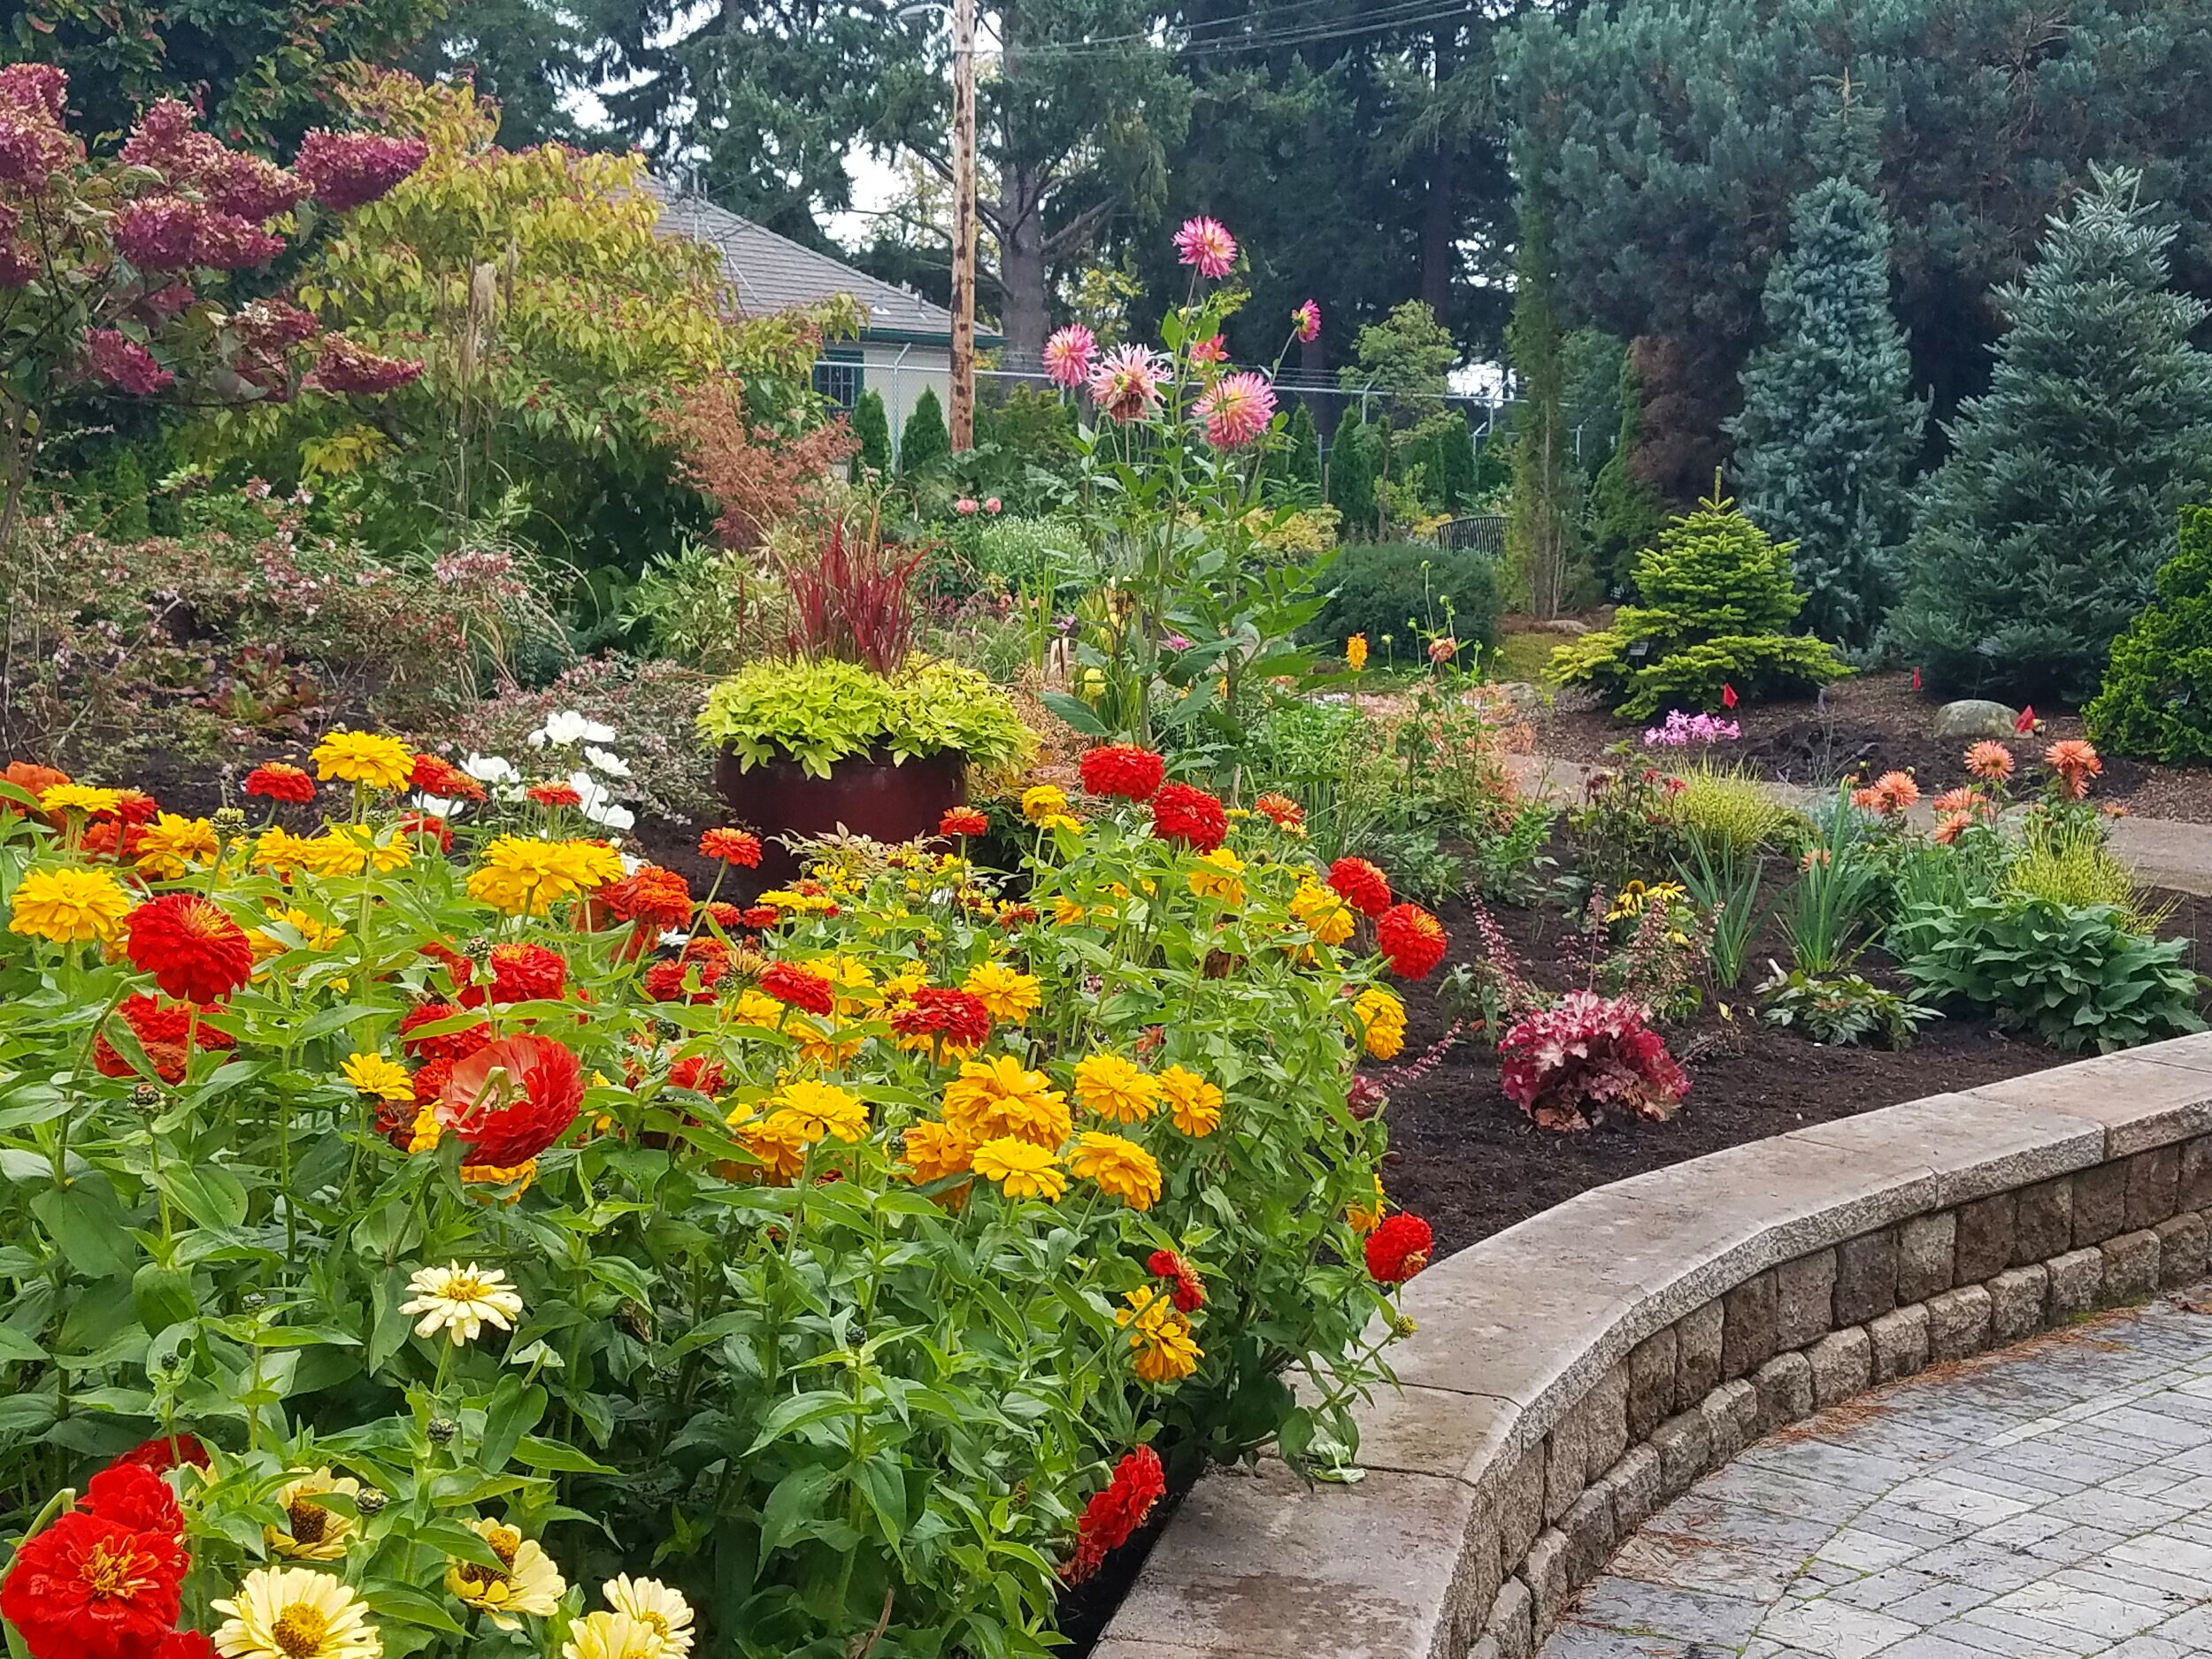  A late summer view of the border features annuals mixed with dahlias, roses and hydrangeas. 